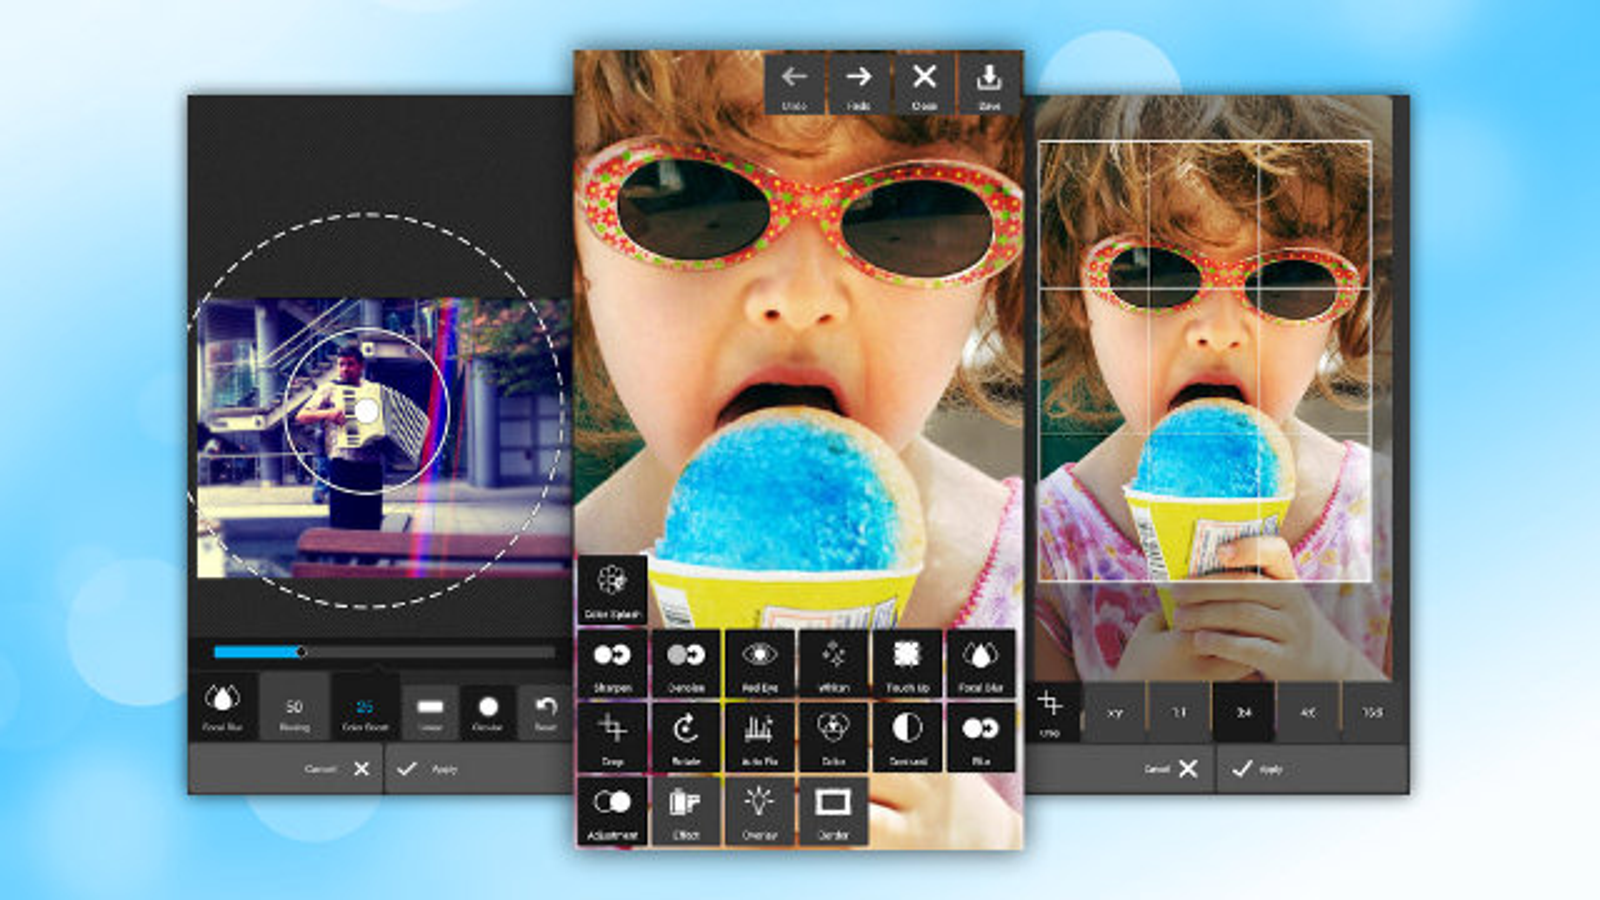 how to fix pixlr editor online if the stylis freezes